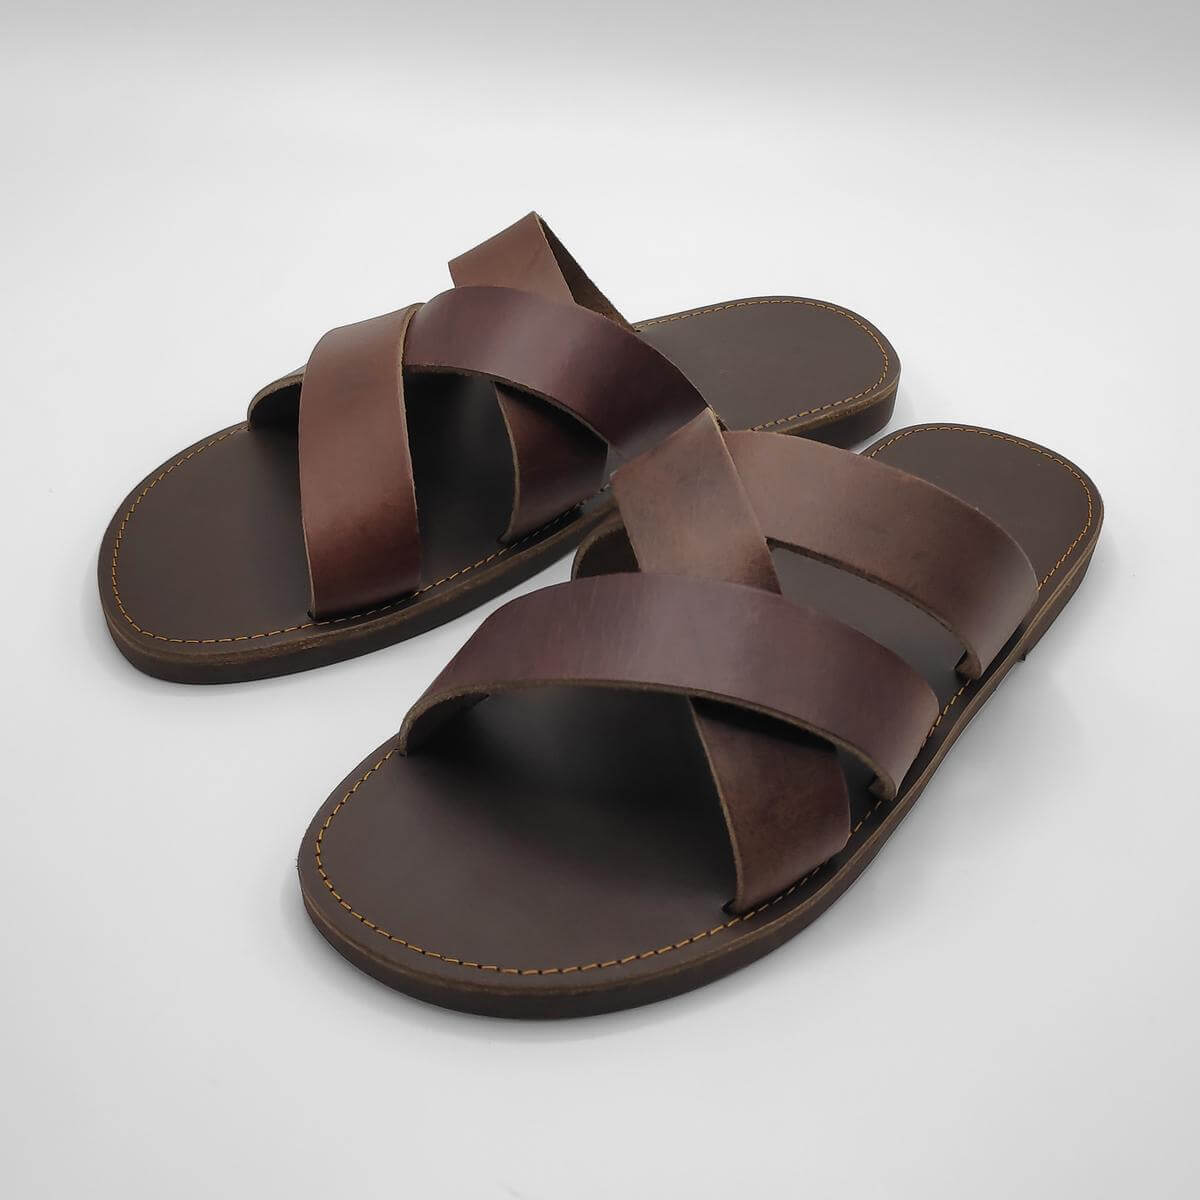 Pierre Cardin Leather Sandals. Now in India